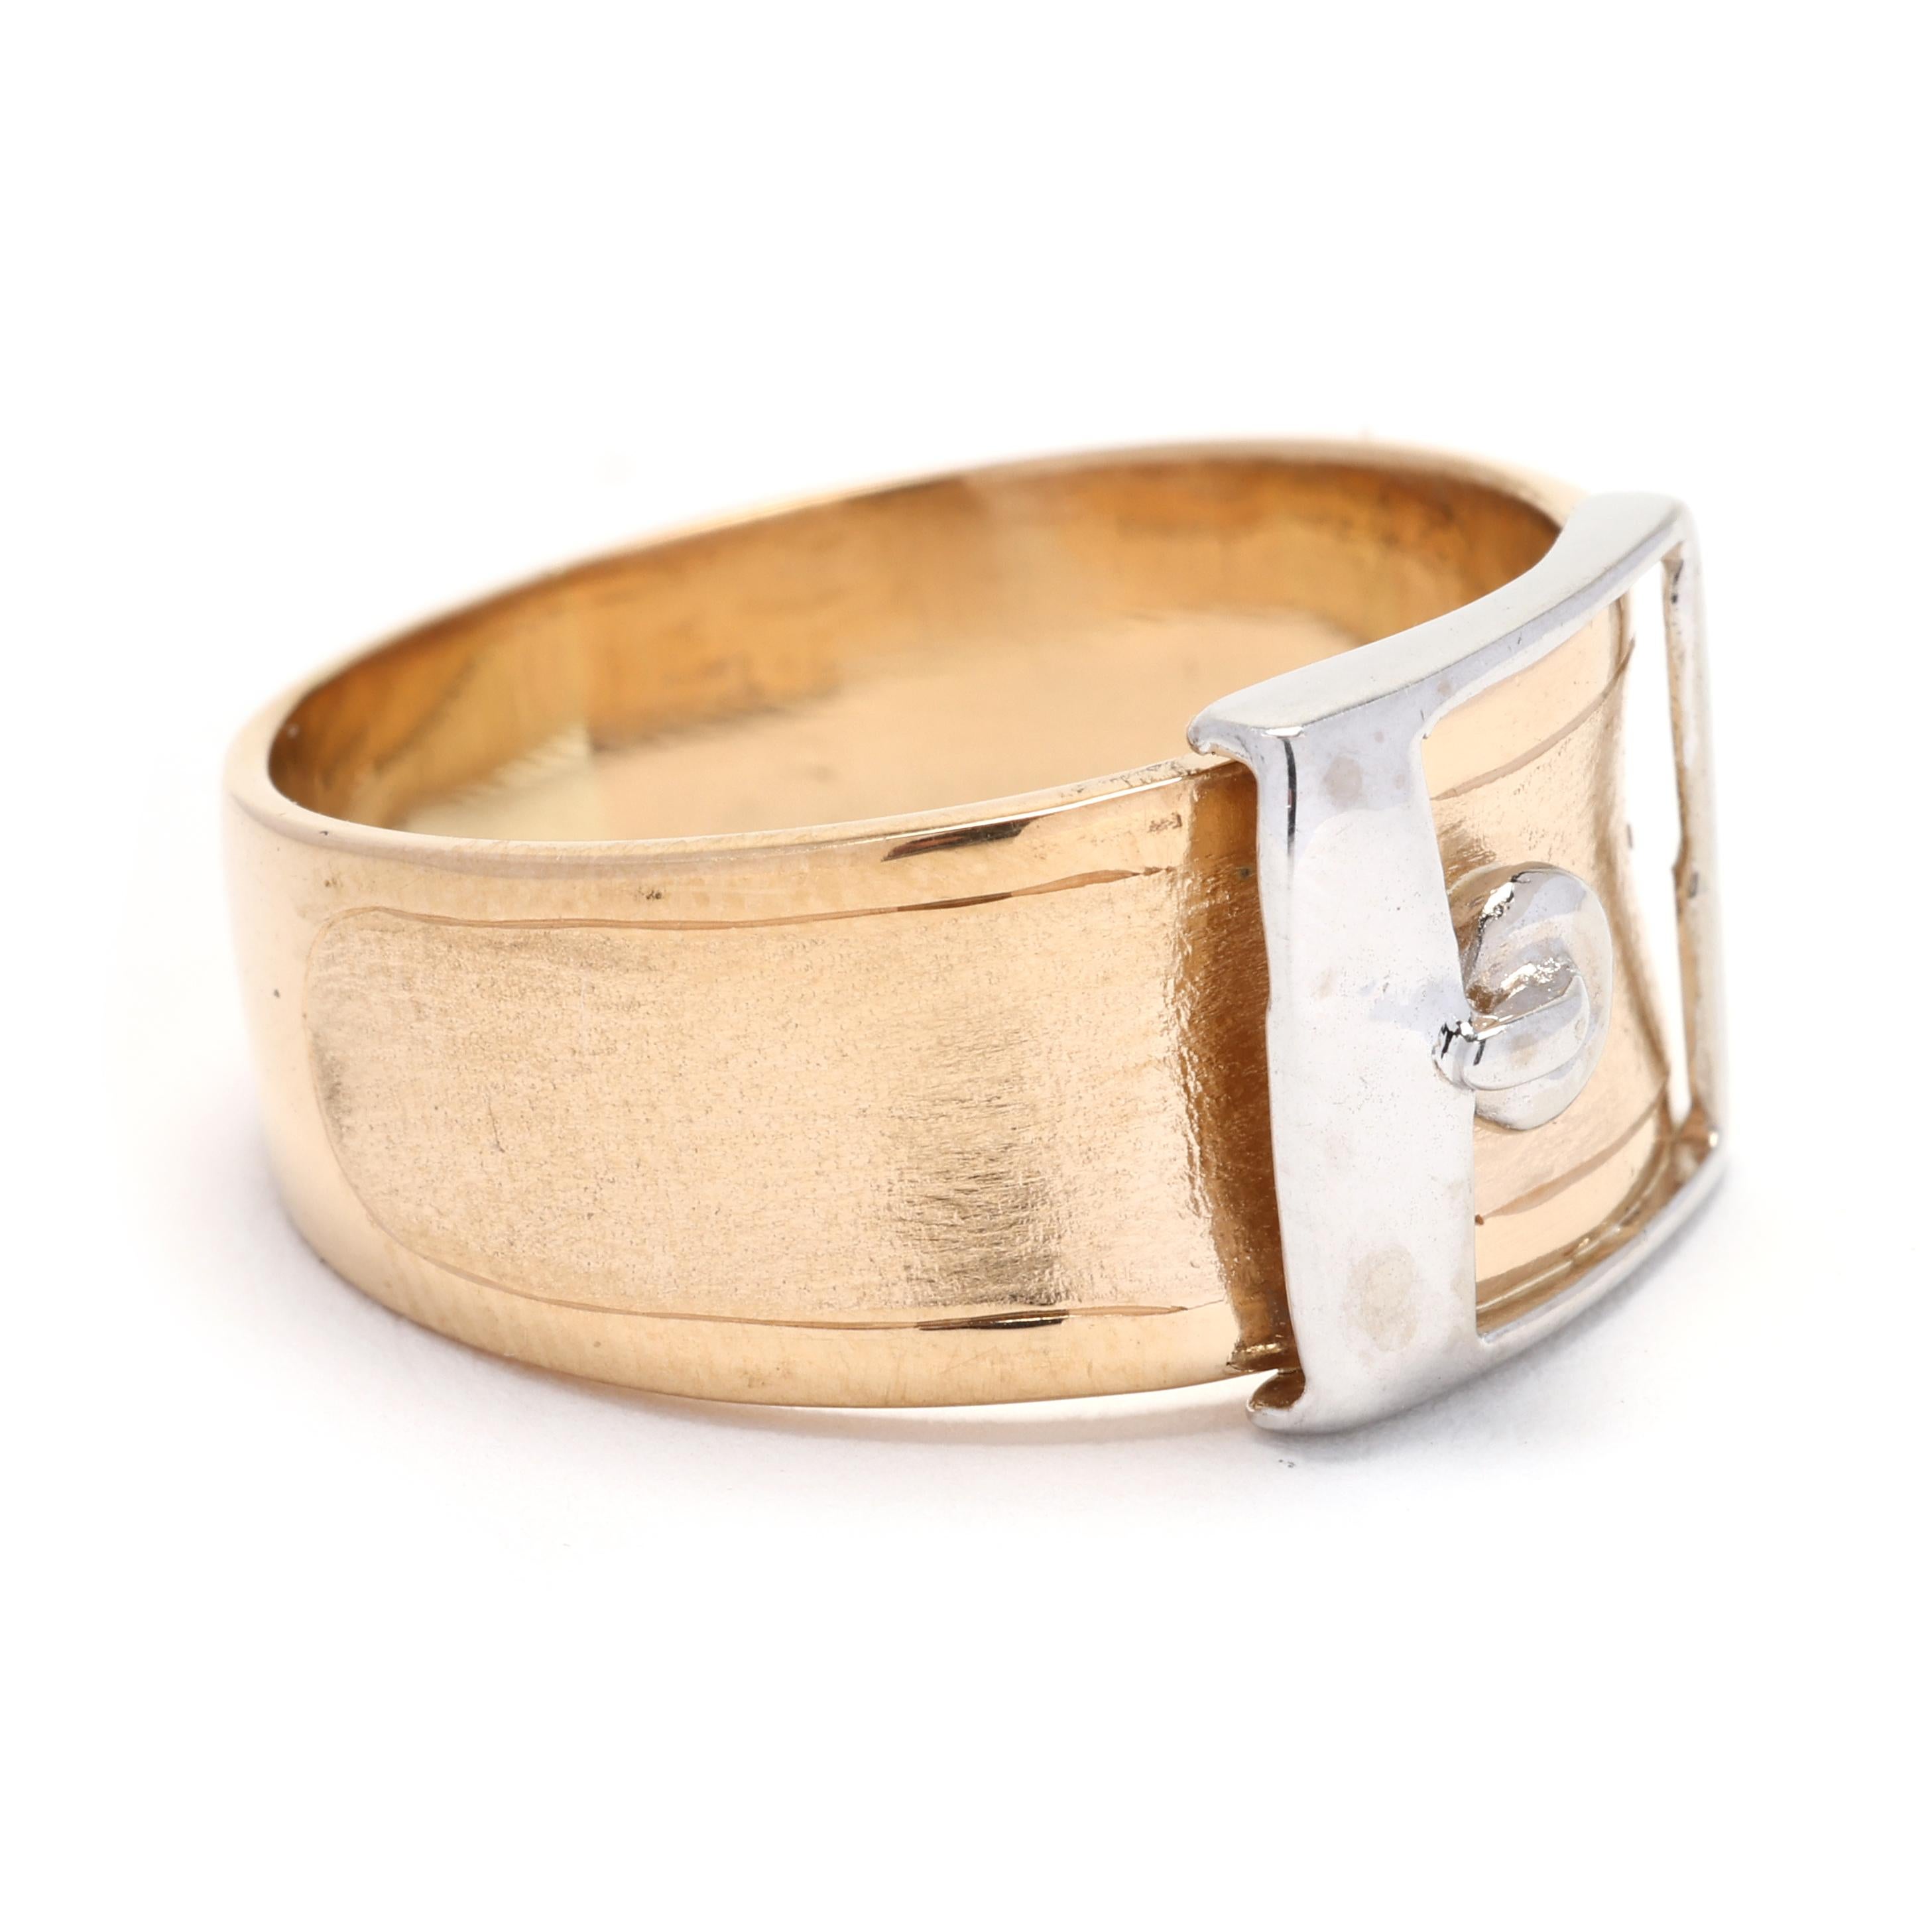 Crafted in 18KT white and yellow gold, this ring offers a luxurious and captivating look. The combination of the two gold tones adds a touch of contrast and visual interest to the design. The buckle motif symbolizes strength and security, making